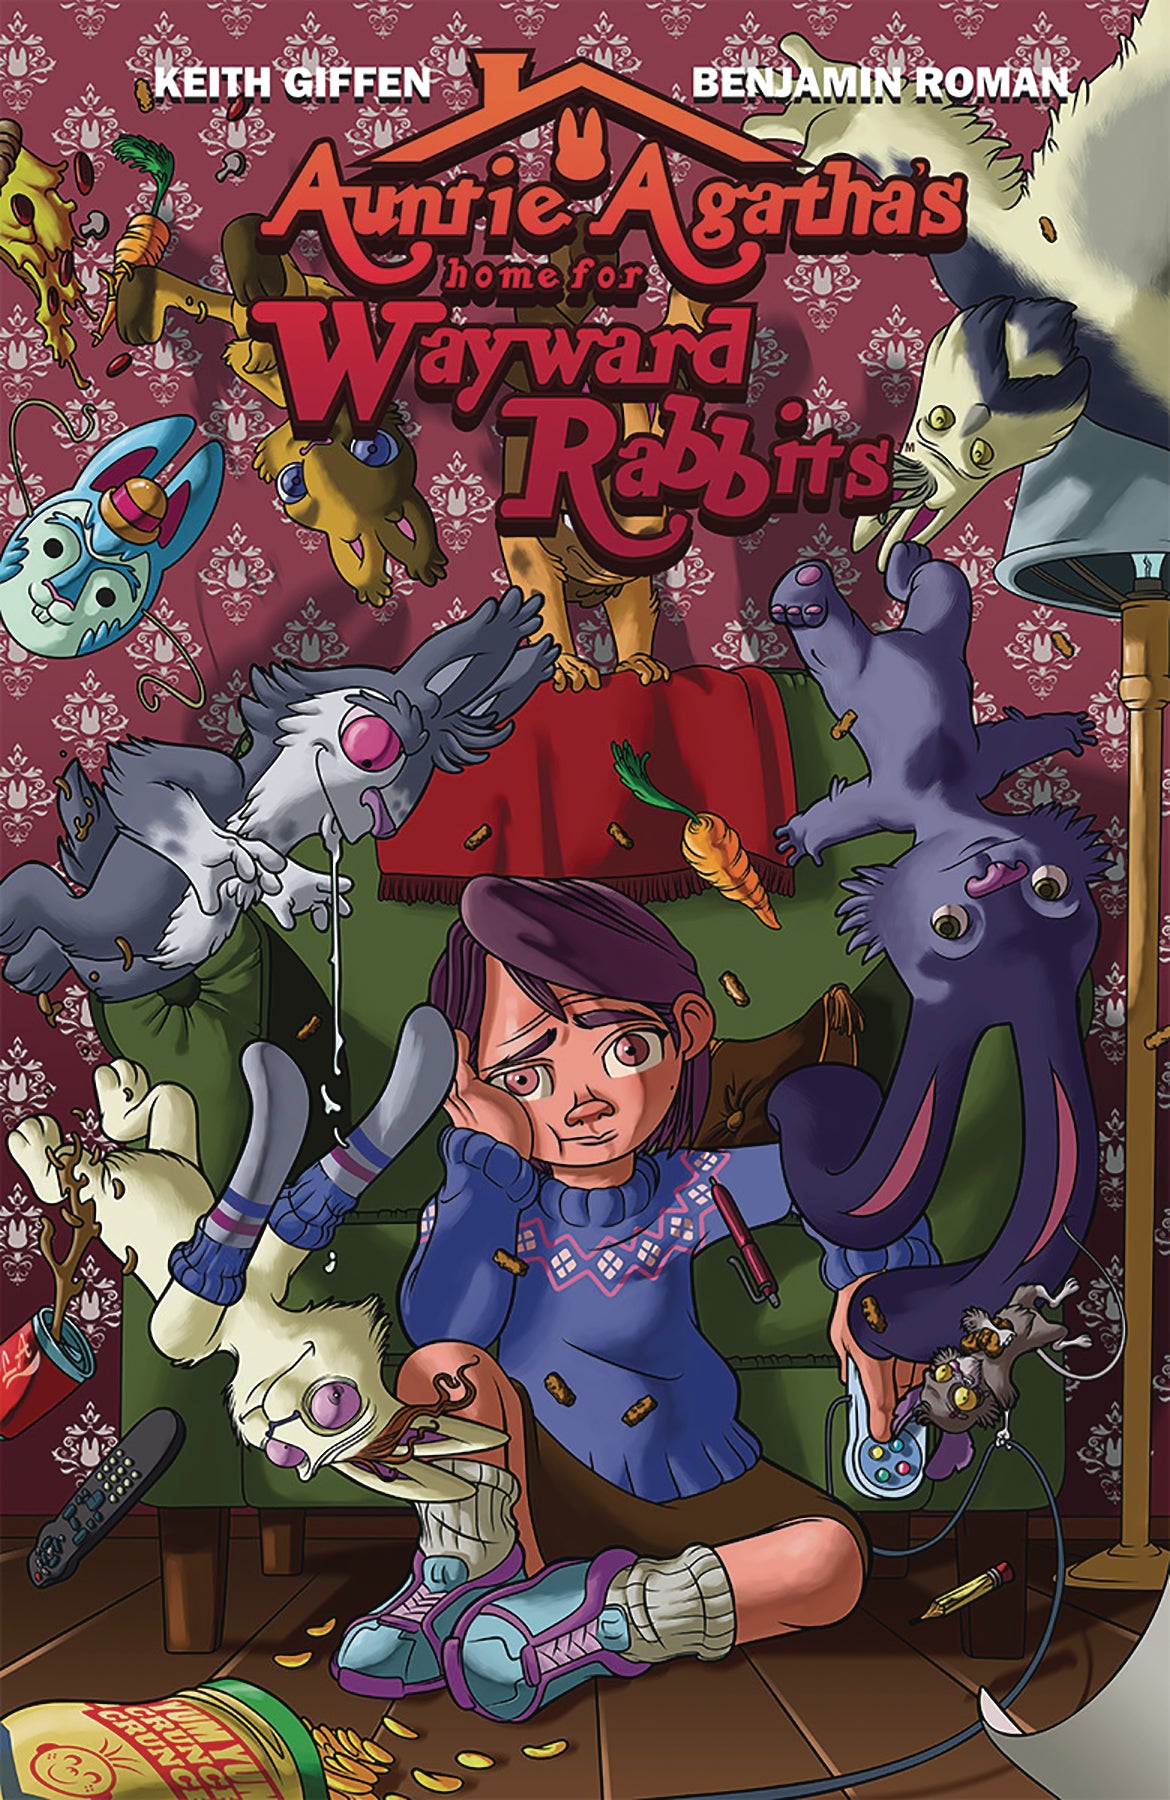 AUNTIE AGATHAS HOME FOR WAYWARD RABBITS #1 (OF 6) COVER